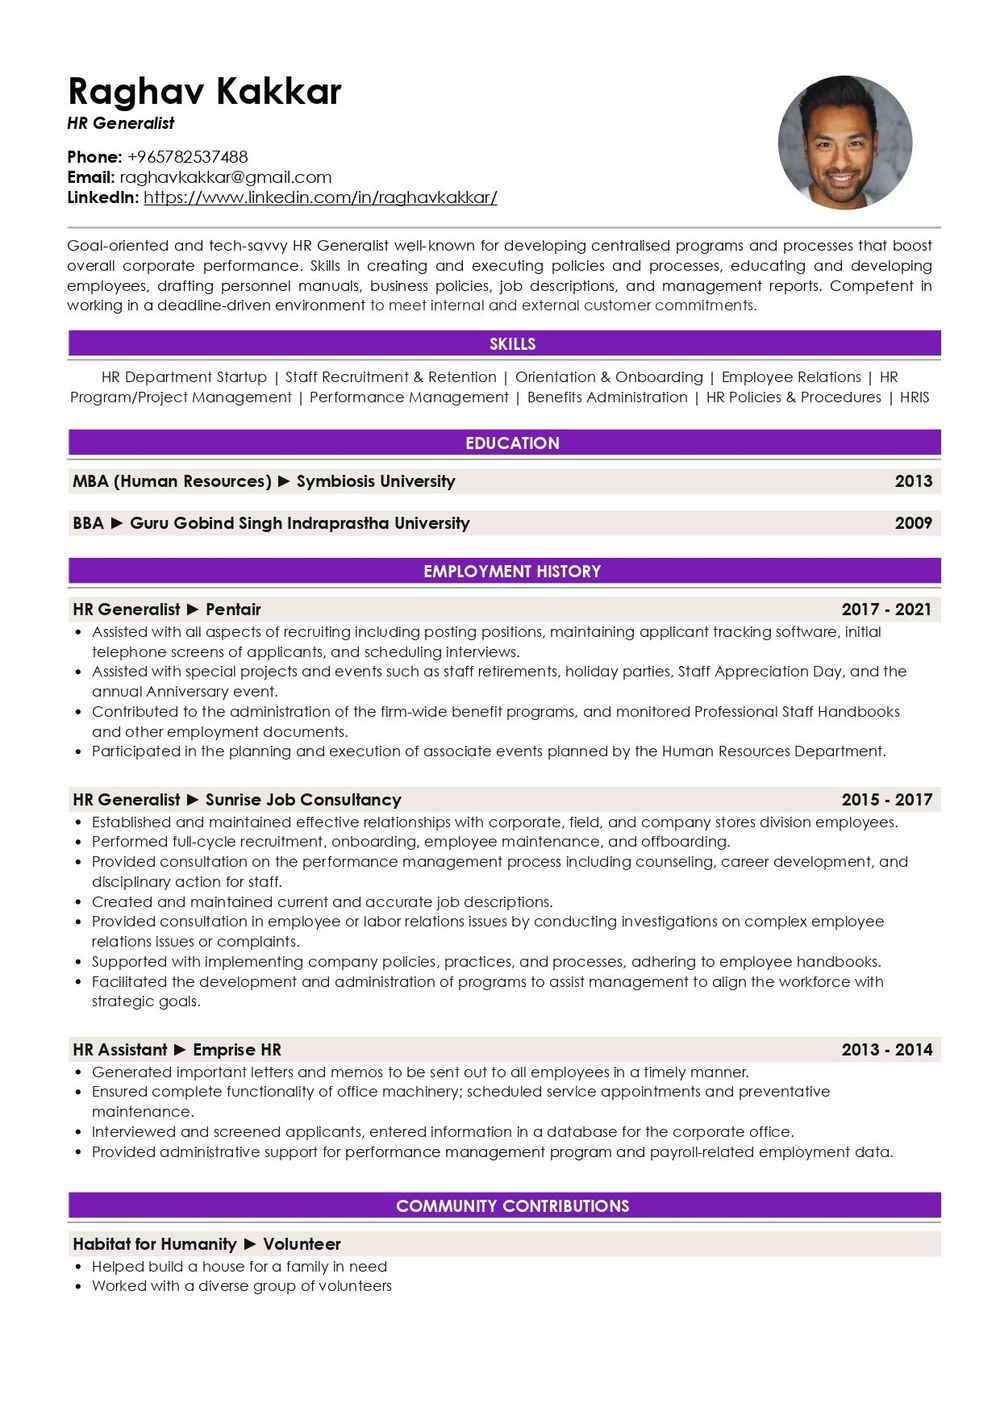 Writing a Resume for HR Jobs [5 Examples]